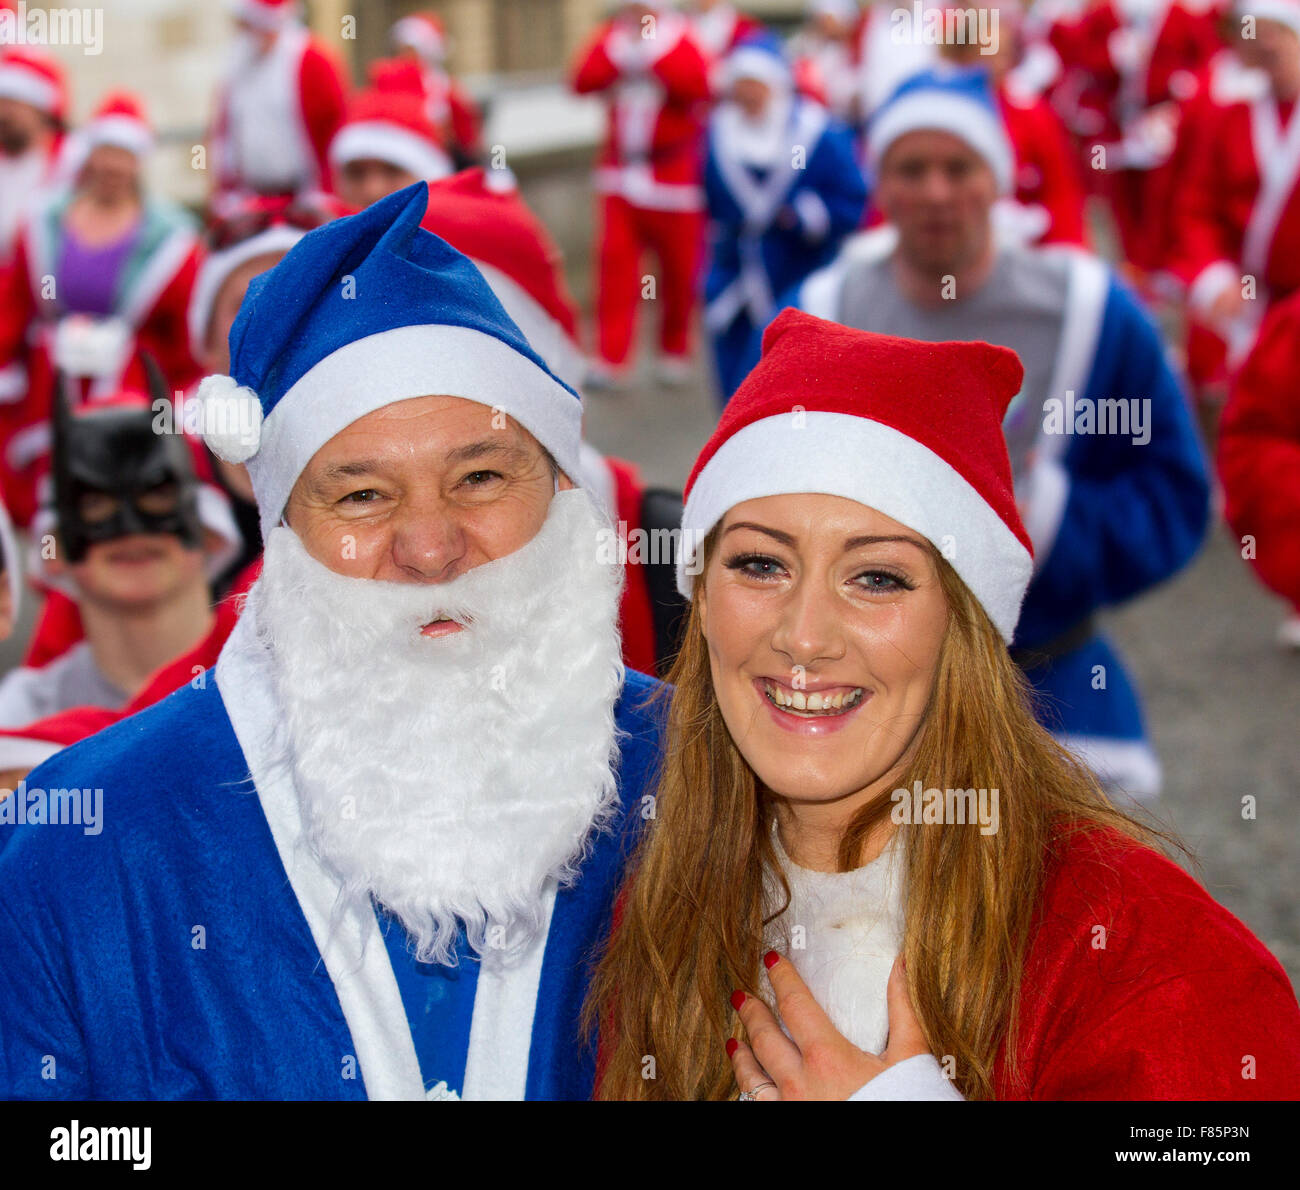 Liverpool, Merseyside, UK  6th December, 2015. A very happy Brian Kempson after his girlfriend, Leila Kelley from Halewood, accepts his marriage proposal.  Brian proposed down on one knee as the Liverpool Santa Dash ran down Churchill Way. His romantic gesture was greeted by cheers from the thousands of runners.  The Medicash Santa Dash course starts and finishes in Liverpool city centre with a 5K route beginning at the Pier Head on Canada Boulevard in front of the Liver Buildings. It finishes in front of the Town Hall at Castle Street.  Credit:  Mar Photographics/Alamy Live News Stock Photo